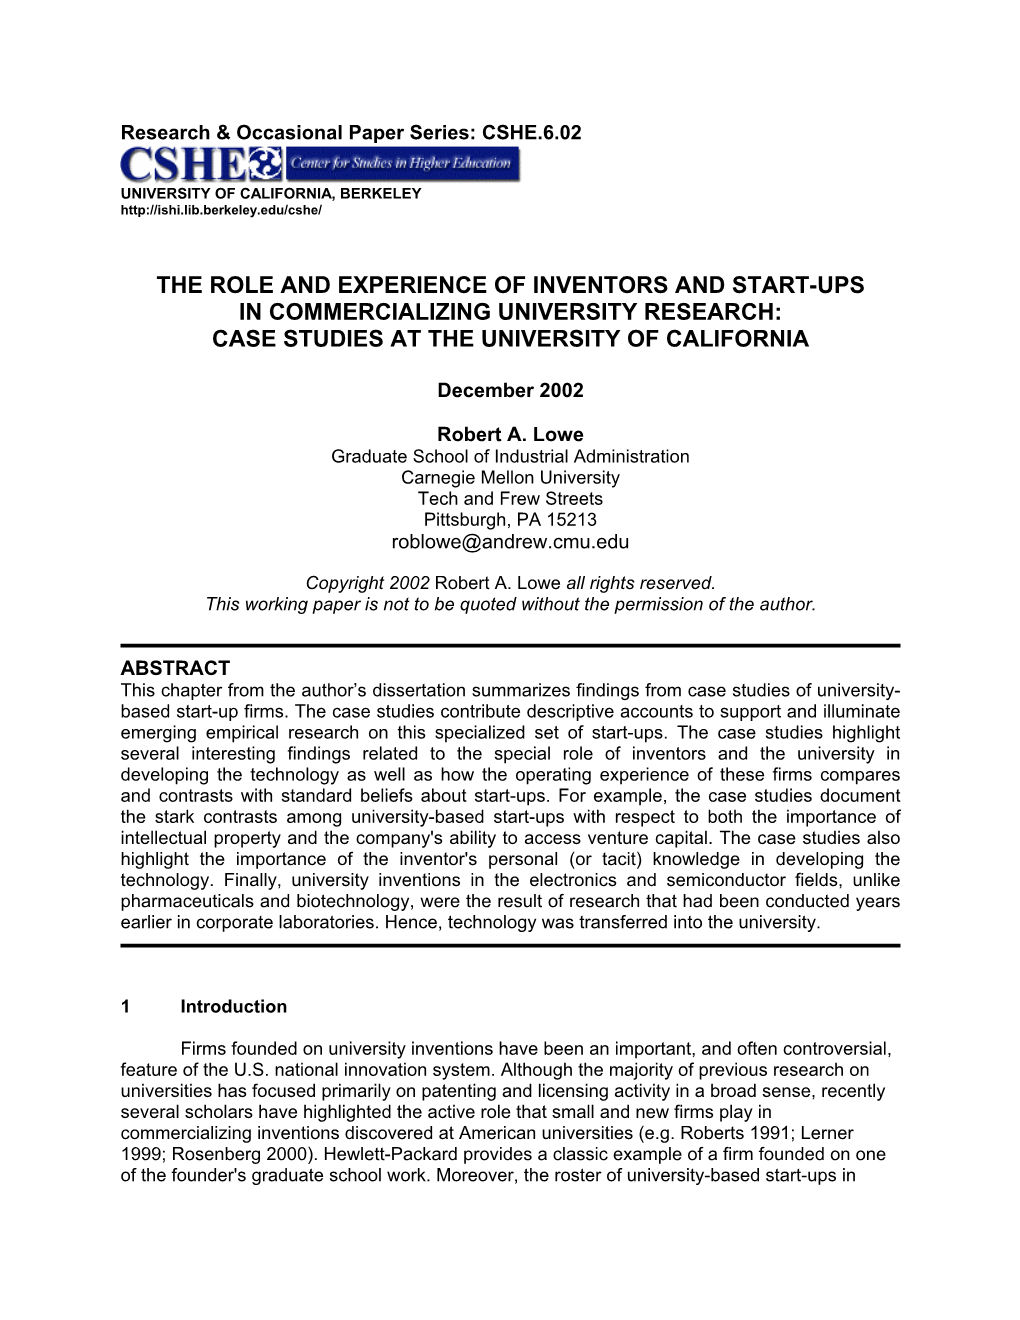 The Role and Experience of Inventors and Start-Ups in Commercializing University Research: Case Studies at the University of California